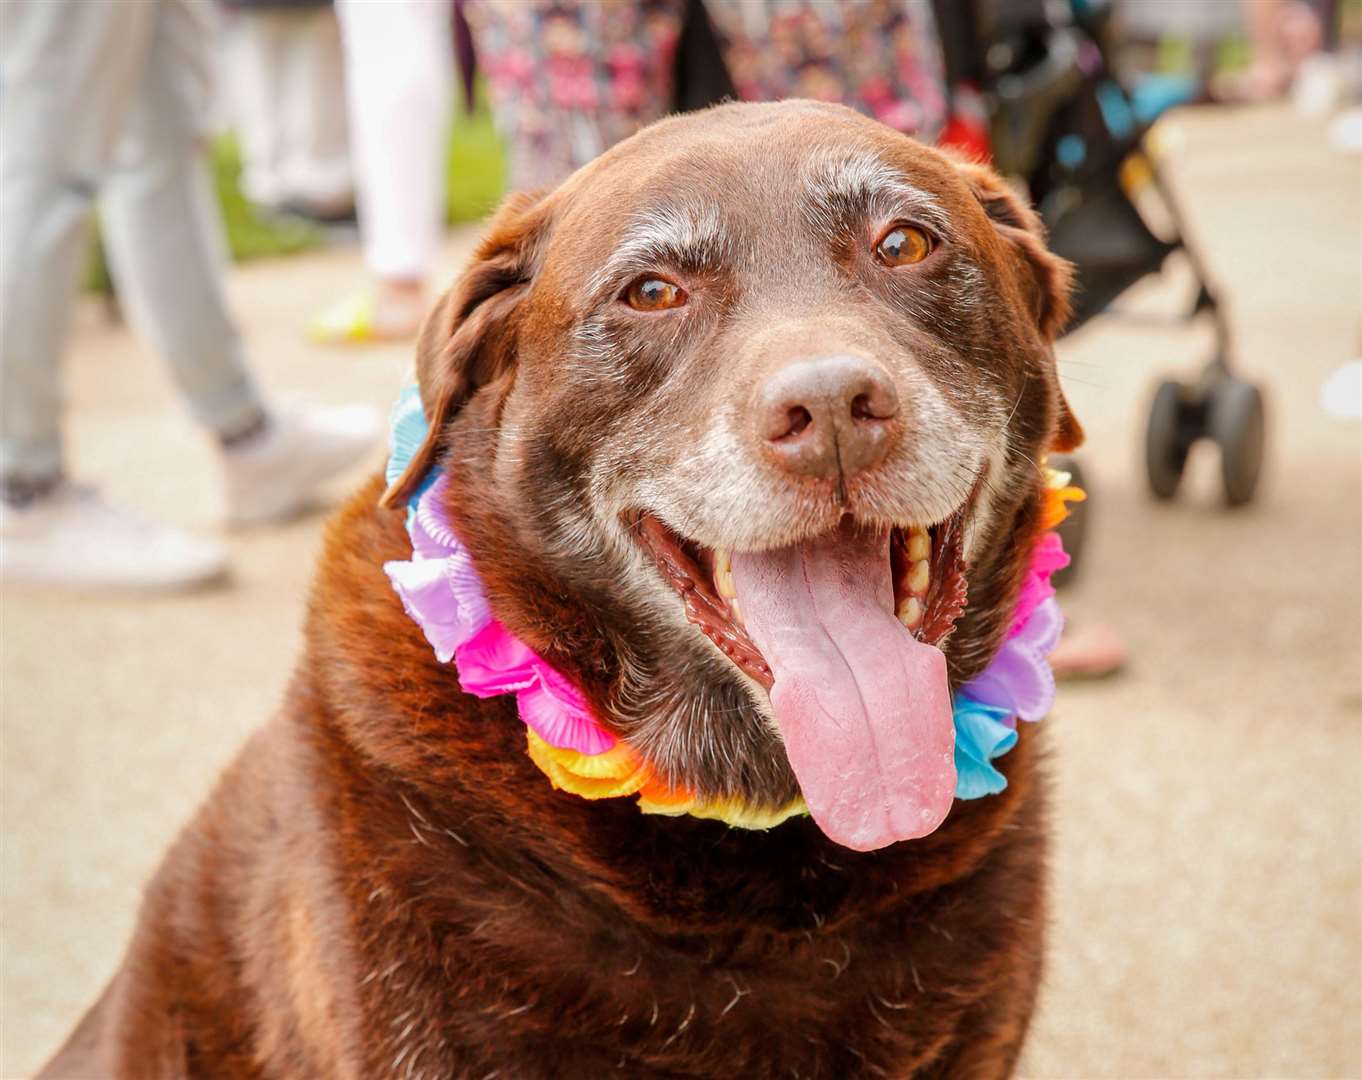 Harvey the chocolate lab with his pride garland at Tunbridge Wells Pride 2019. Picture: Matthew Walker